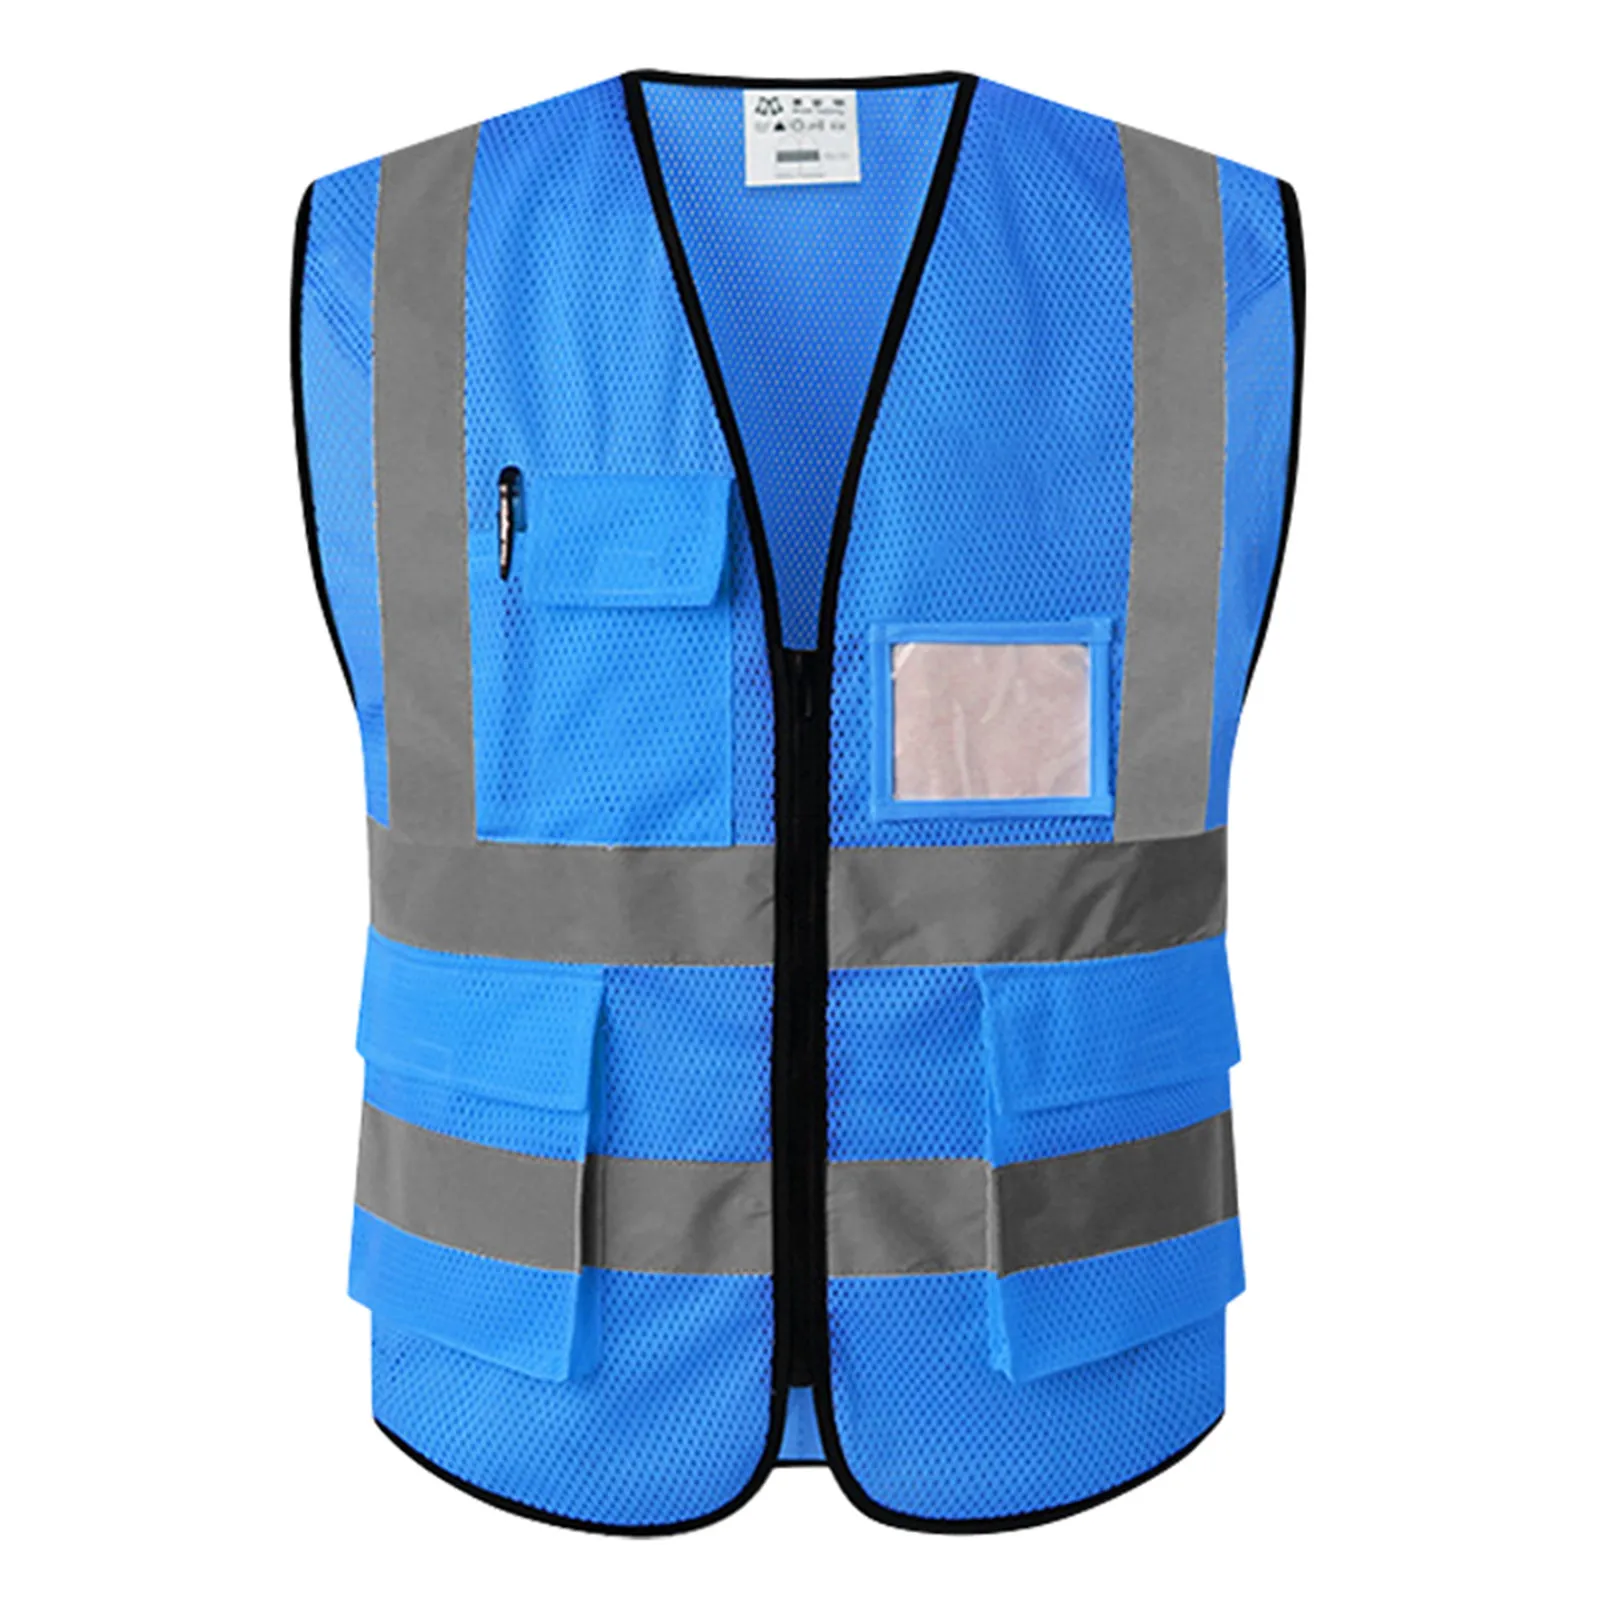 

High Visibility Reflective Safety Vest Traffic Construction Outdoor Fluorescent Zippered Work Clothes Night Safety Clothing